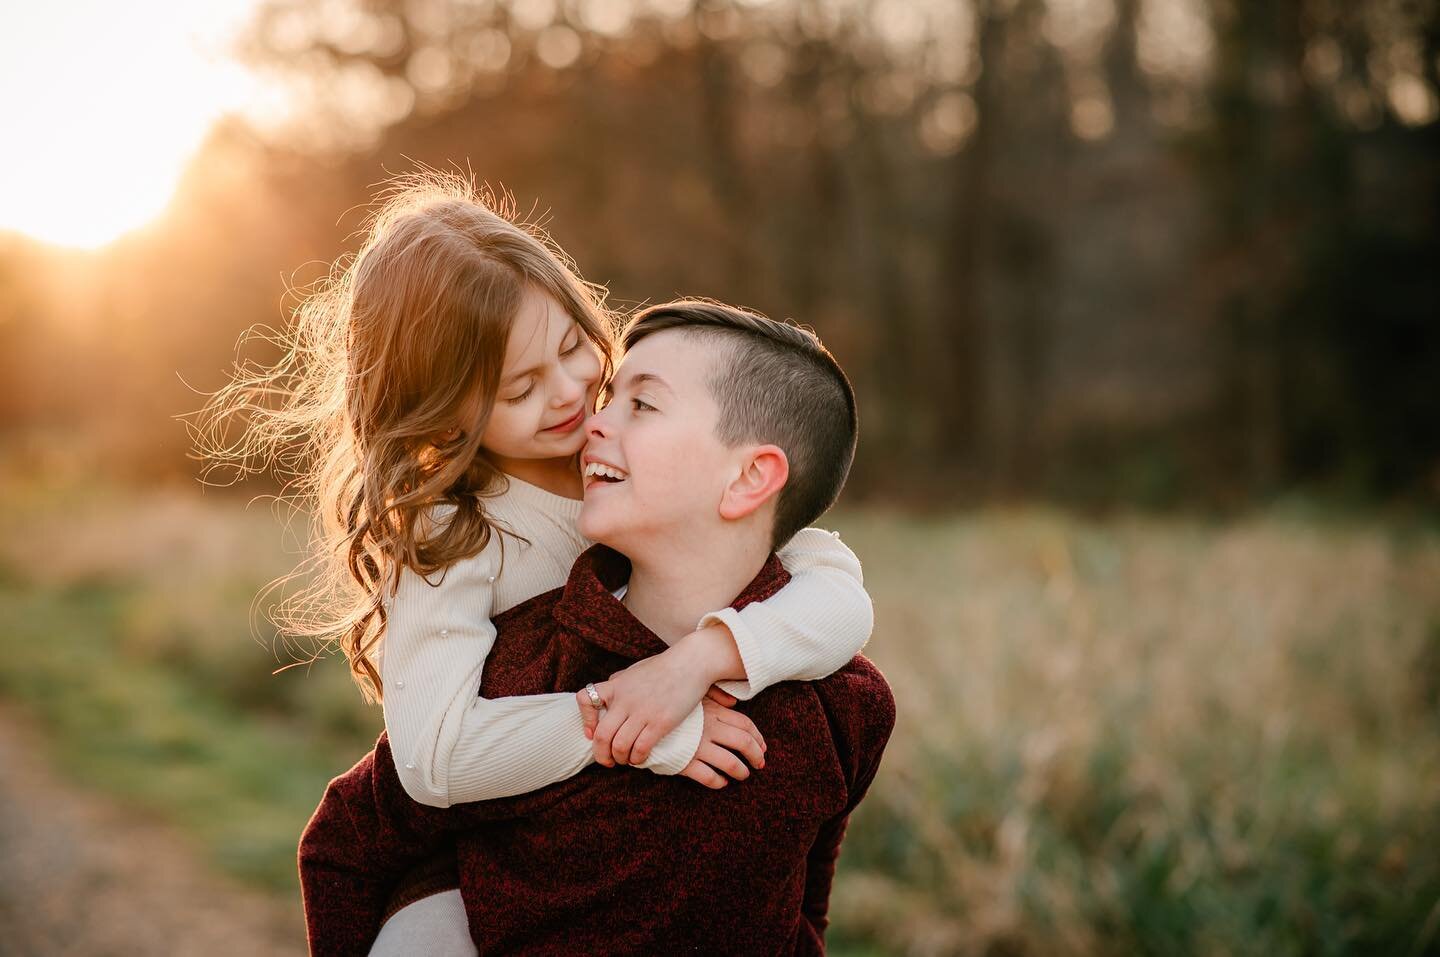 &ldquo;Brother and sister, together as friends, ready to face whatever life sends. Joy and laughter or tears and strife, holding hands tightly as we dance through life.&quot; {Suzi Huitt}

This year especially, siblings have become classmates, teamma